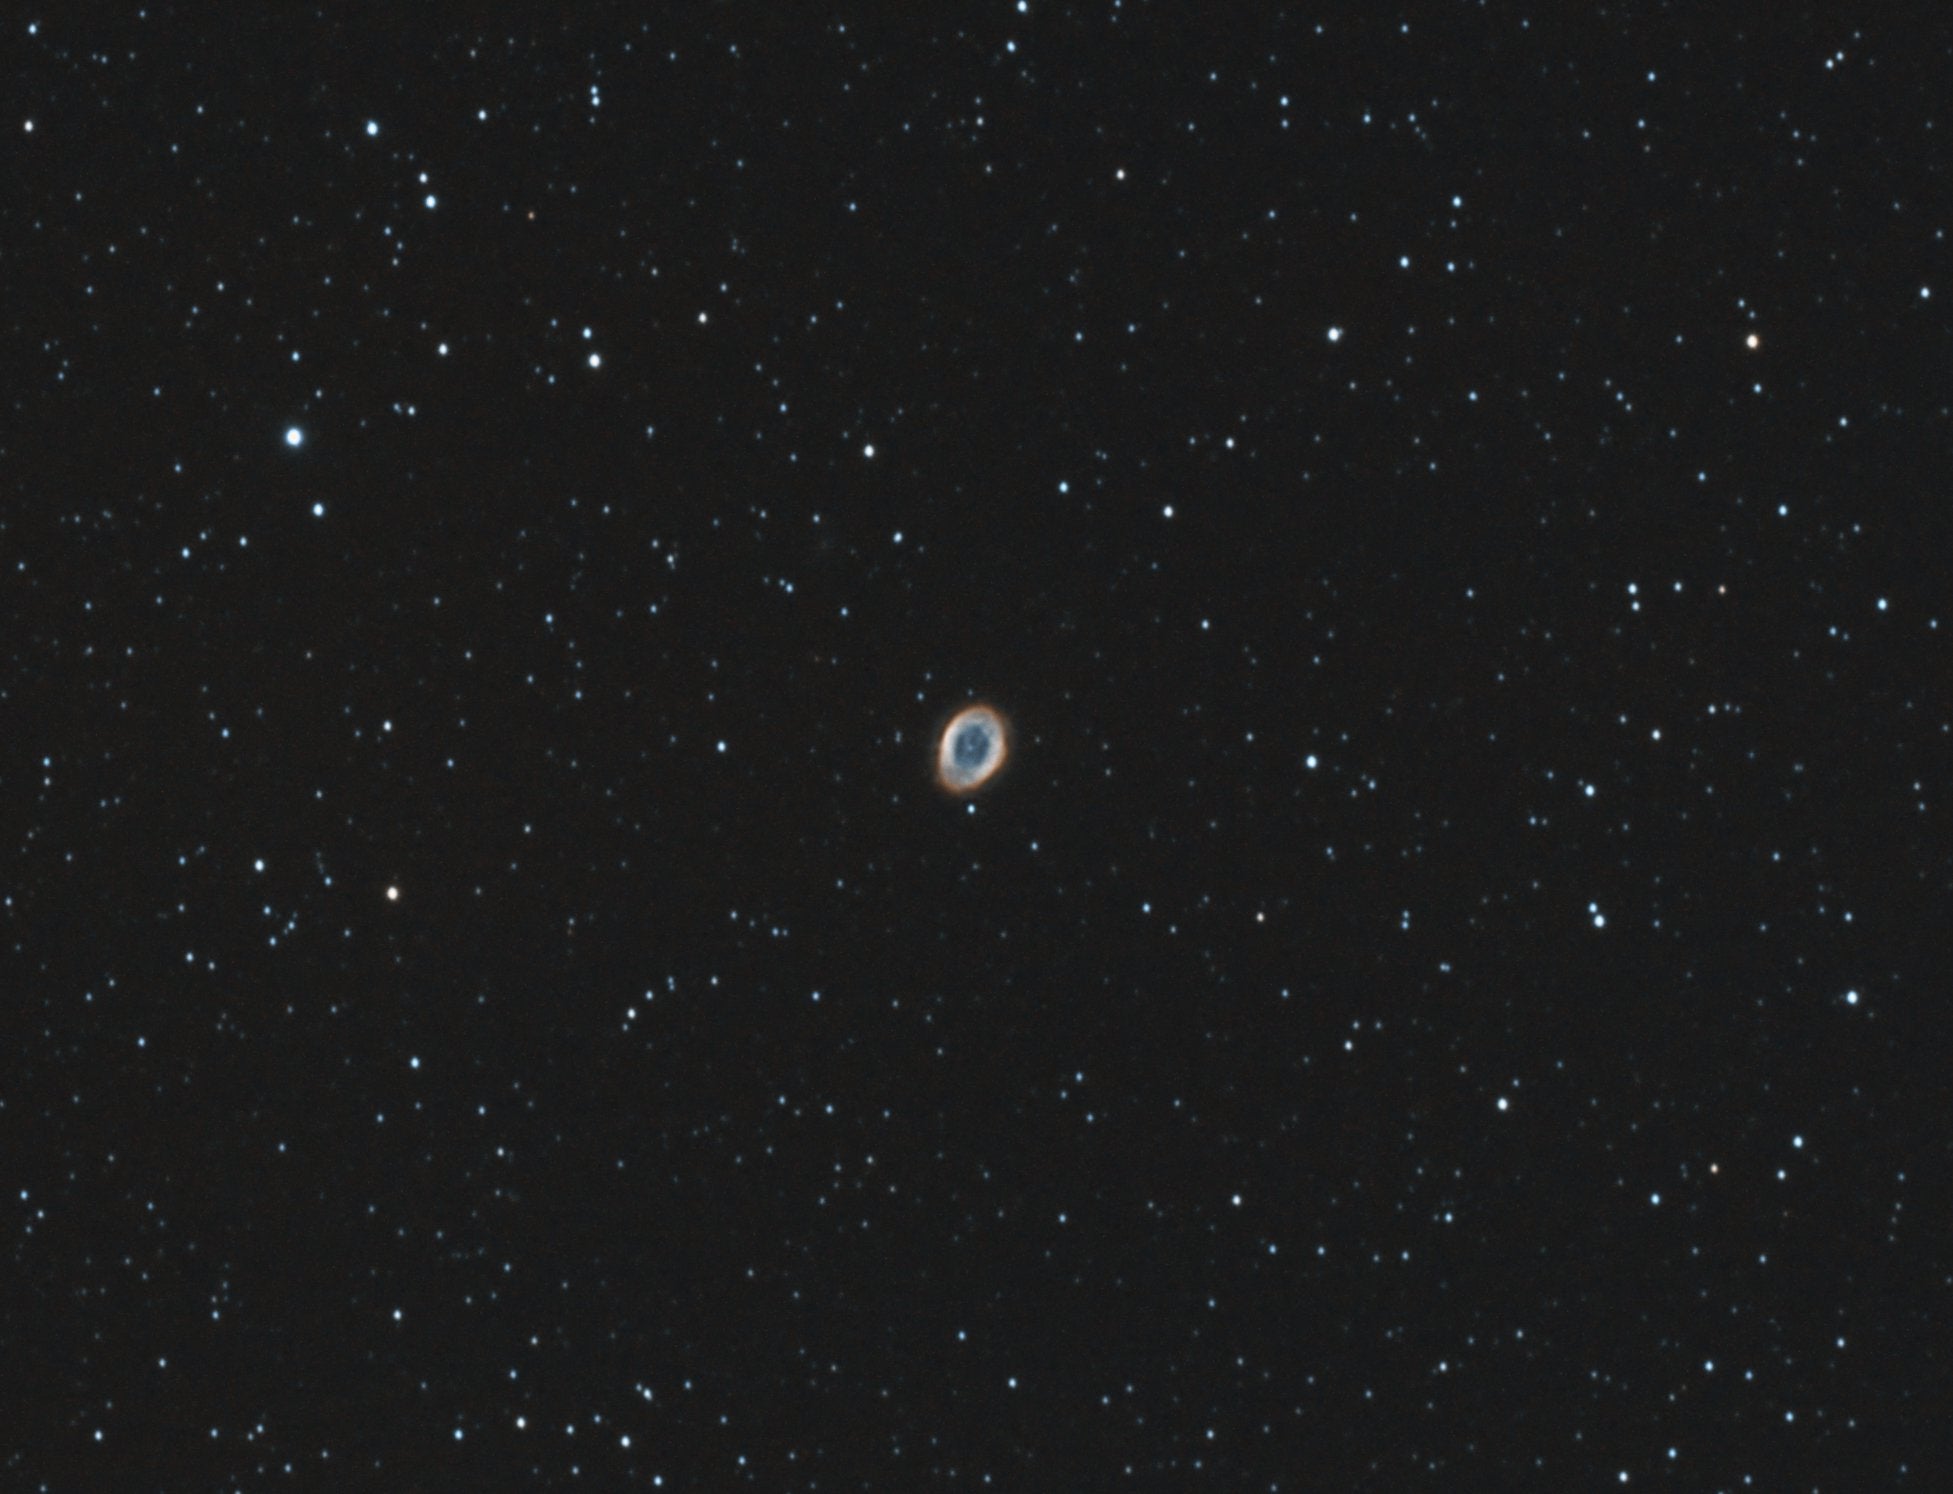 My 2nd attempt at photographing the Ring Nebula last night: space